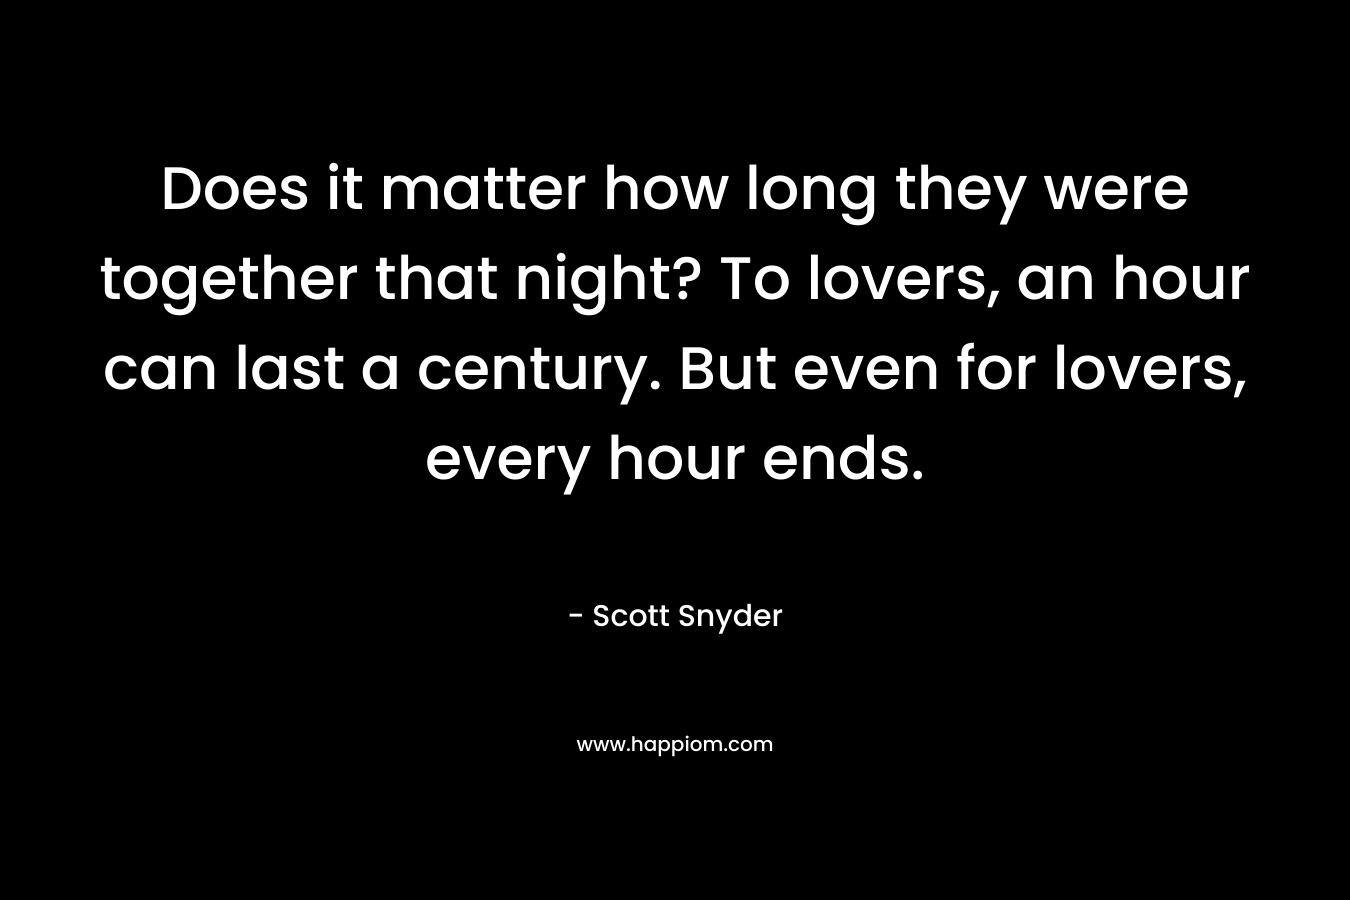 Does it matter how long they were together that night? To lovers, an hour can last a century. But even for lovers, every hour ends. – Scott Snyder